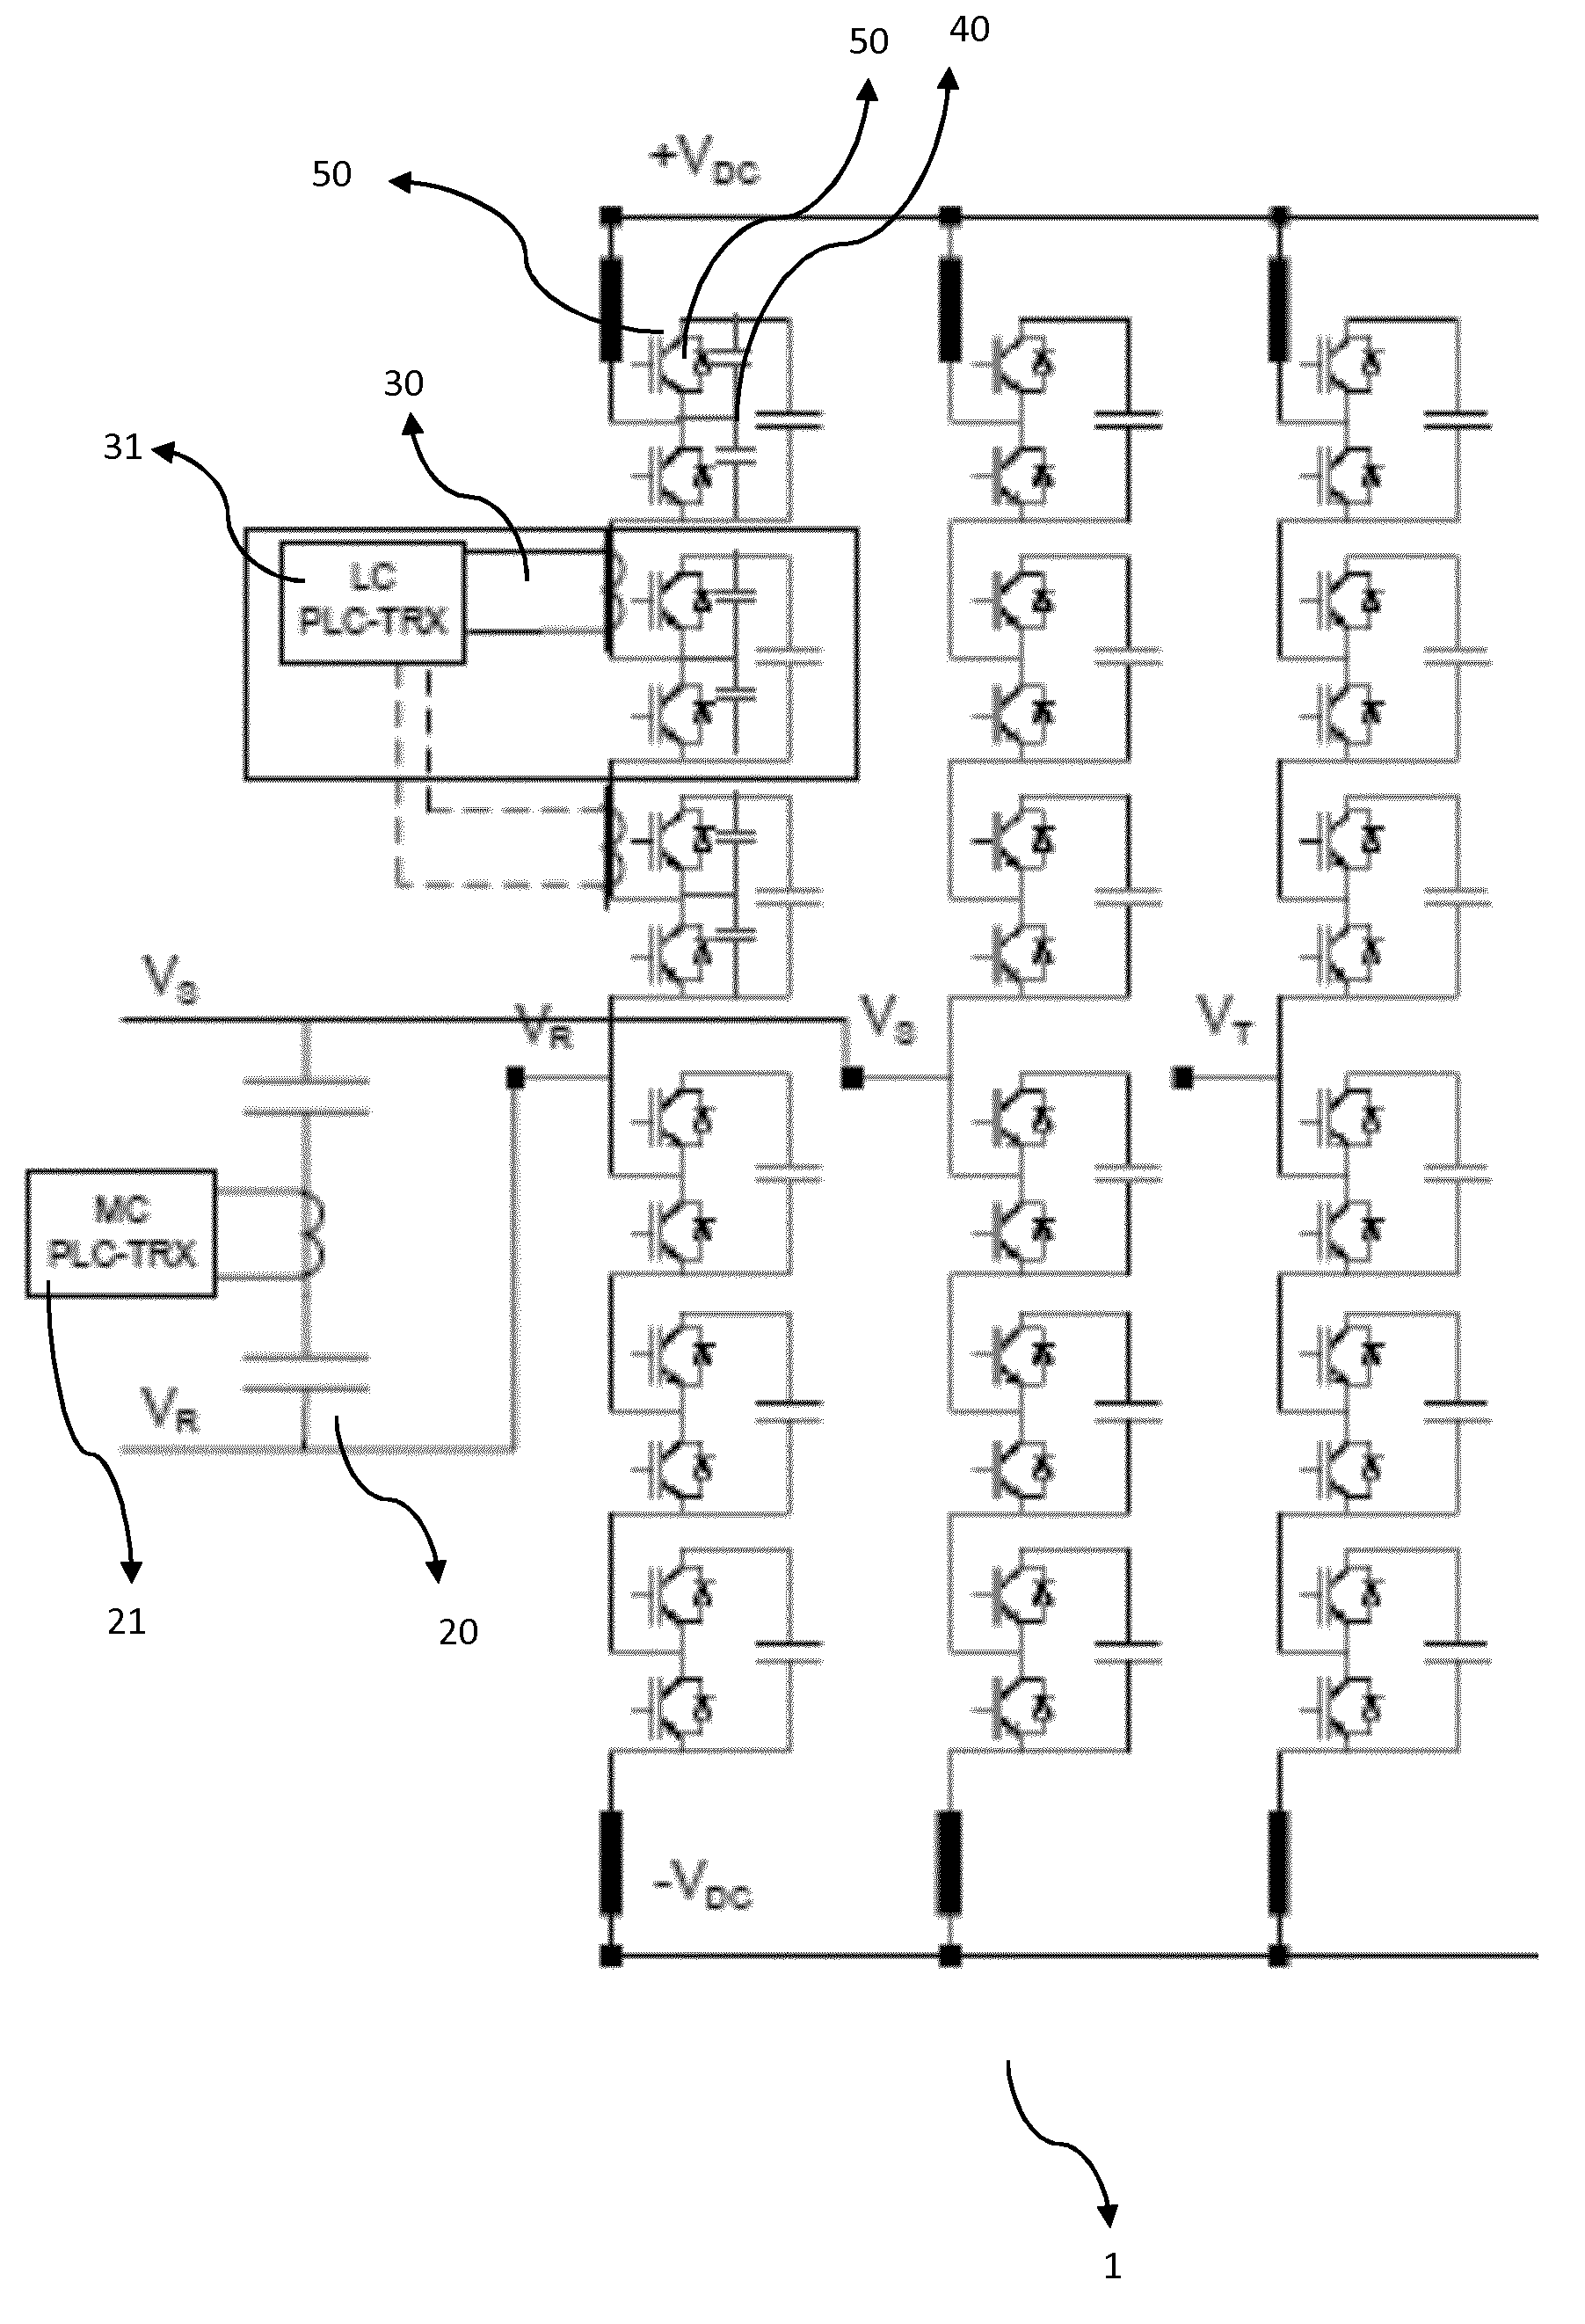 System for transmitting and receiving a power line communication signal over the power bus of a power electronic converter